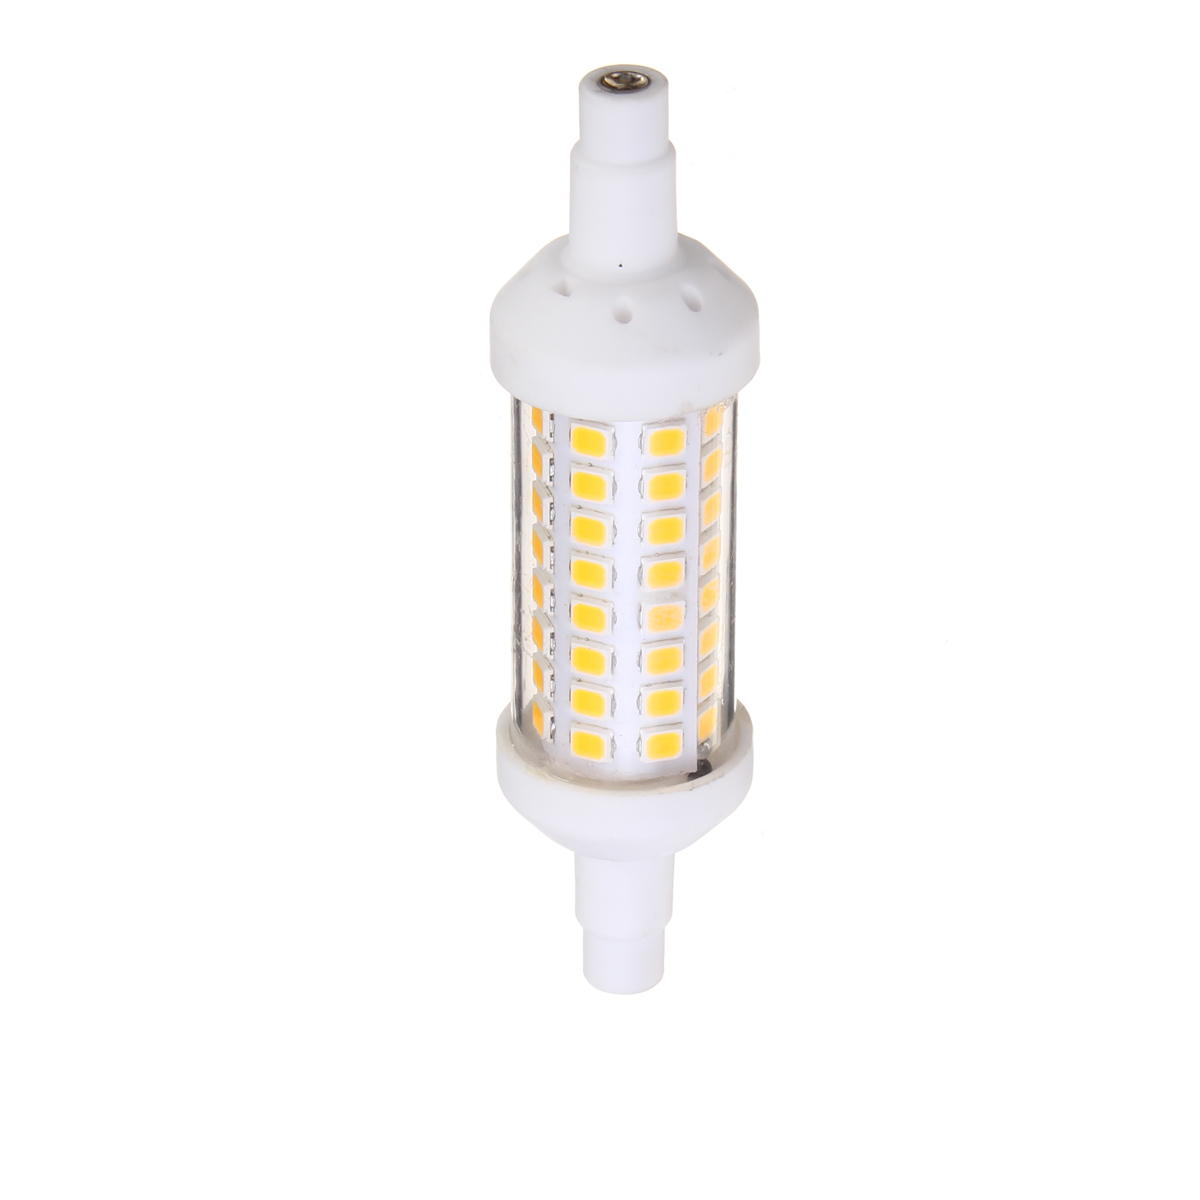 6W-R7S-2835-SMD-Non-dimmable-LED-Flood-Light-Replaces-Halogen-Lamp-Ceramics--High-Bright-AC220-265V-1282825-3